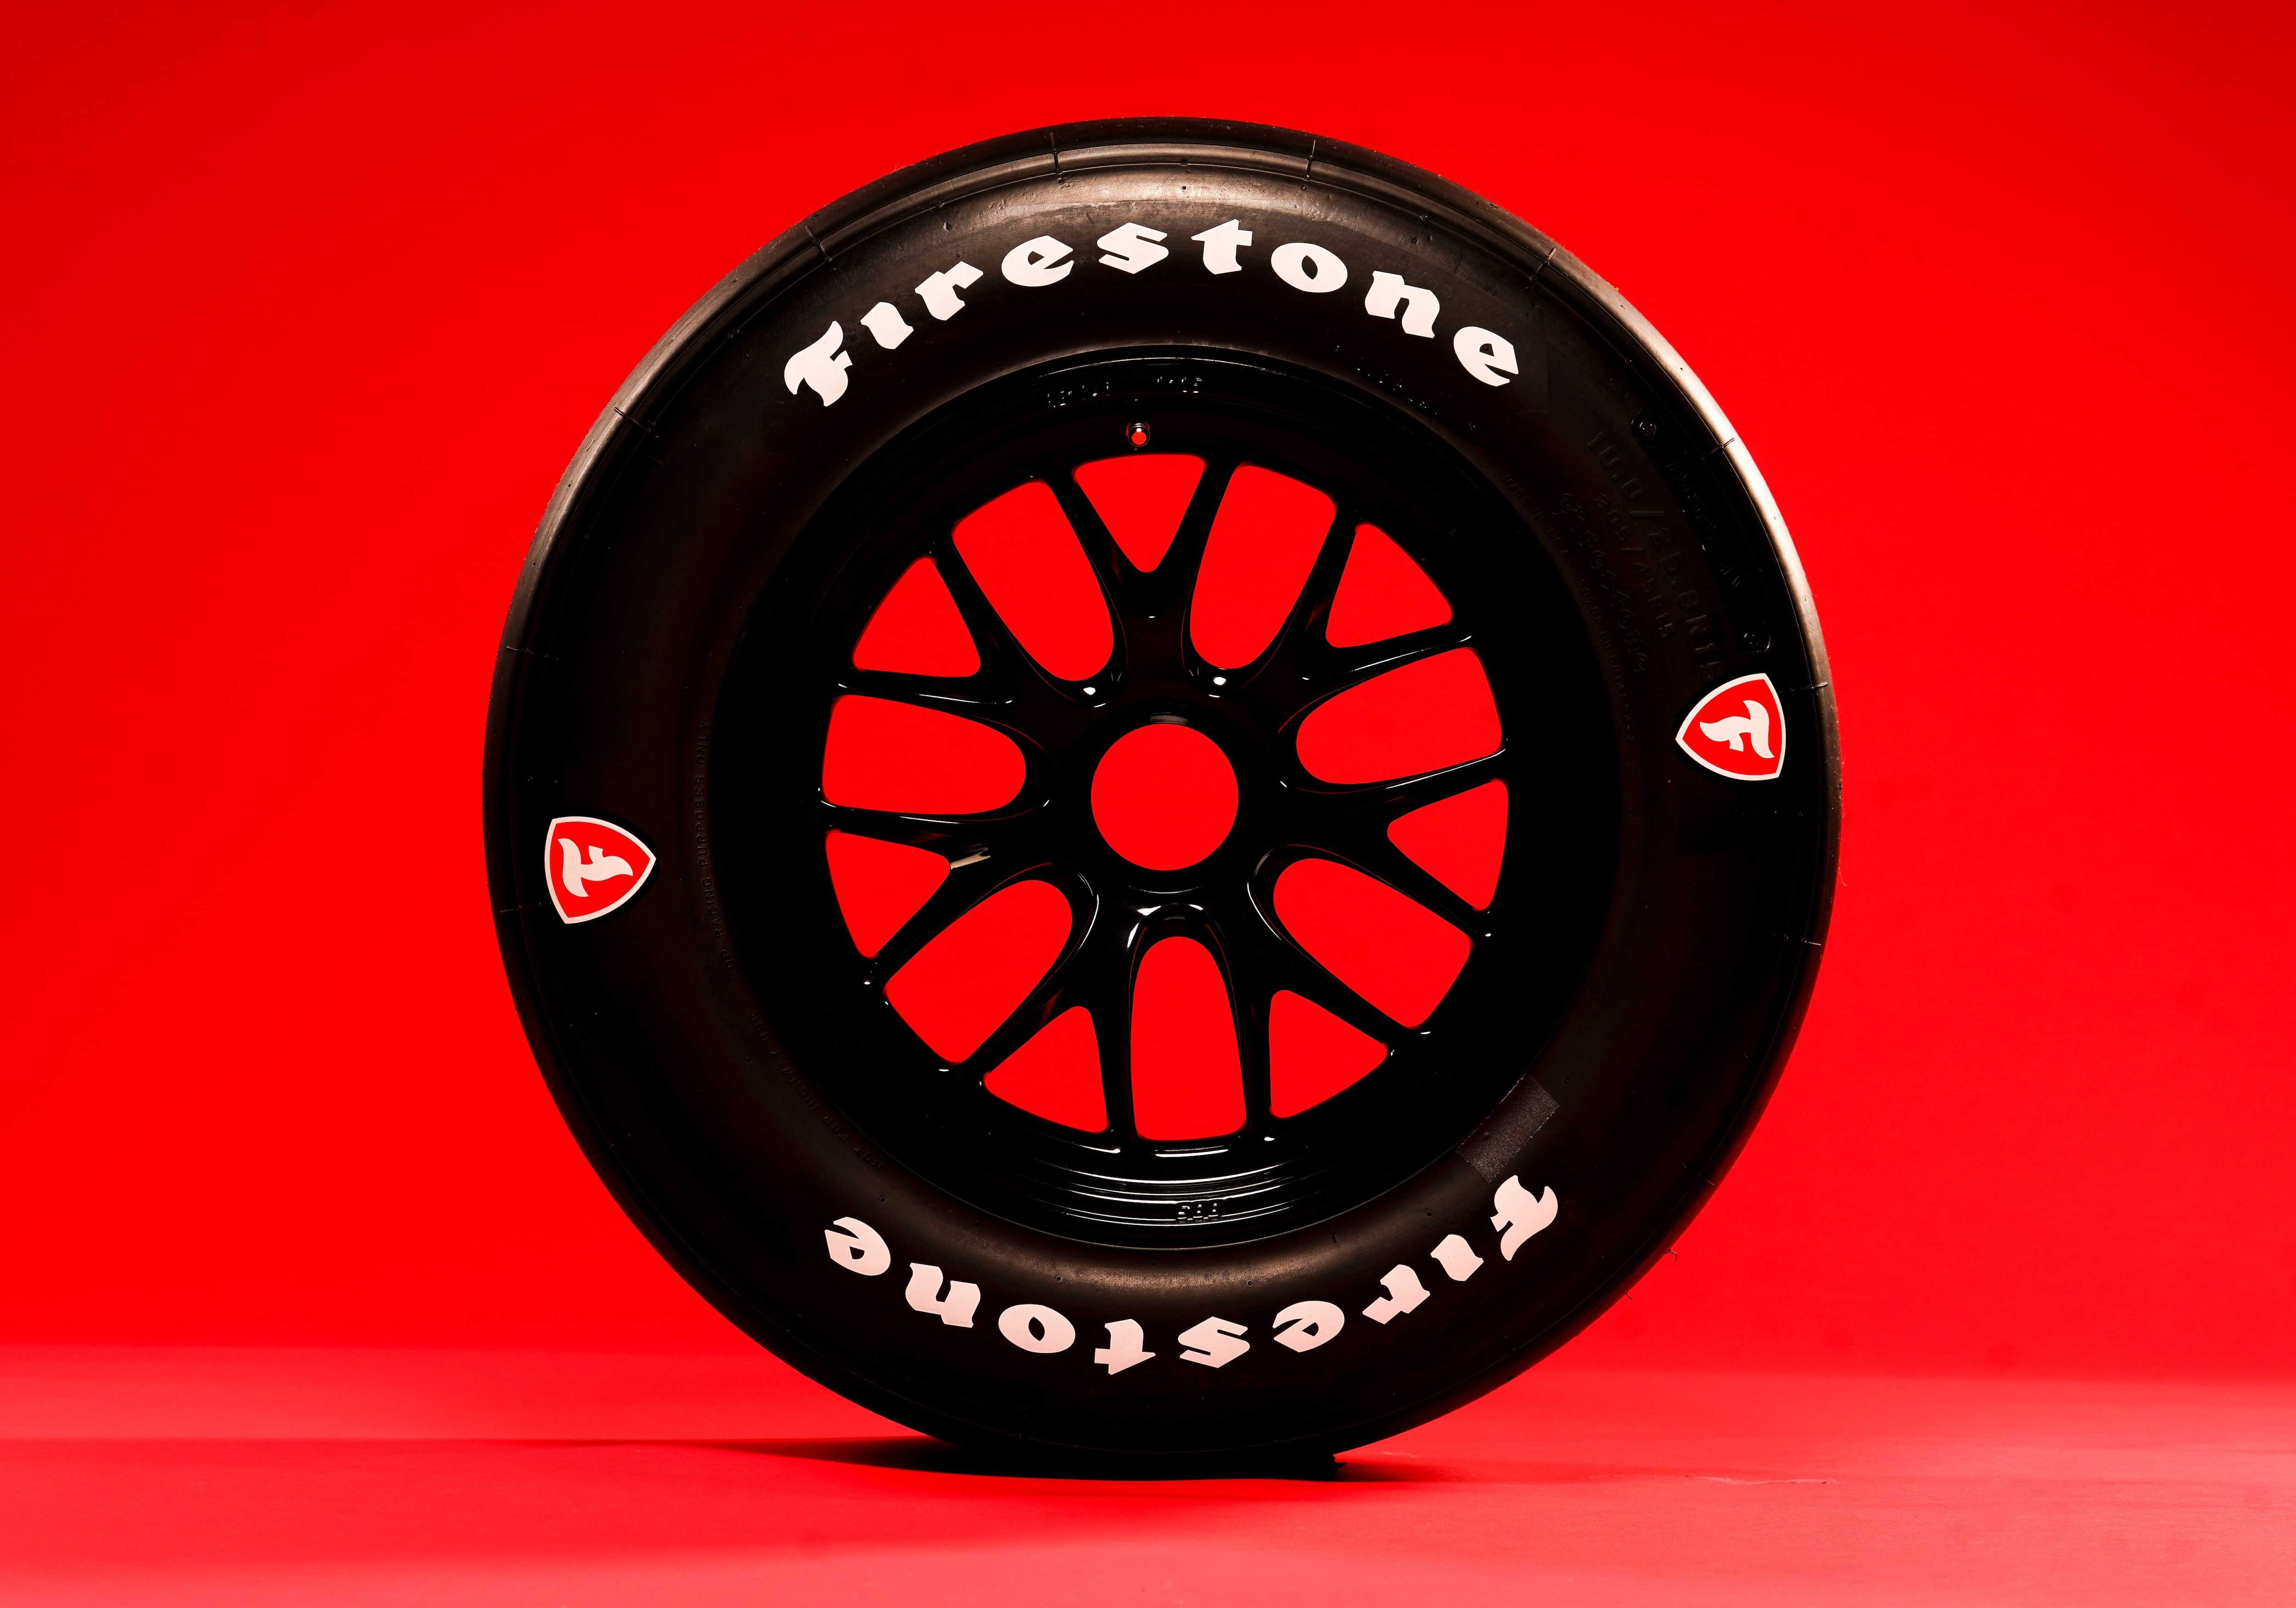 Side view of Firestone race tire, red background